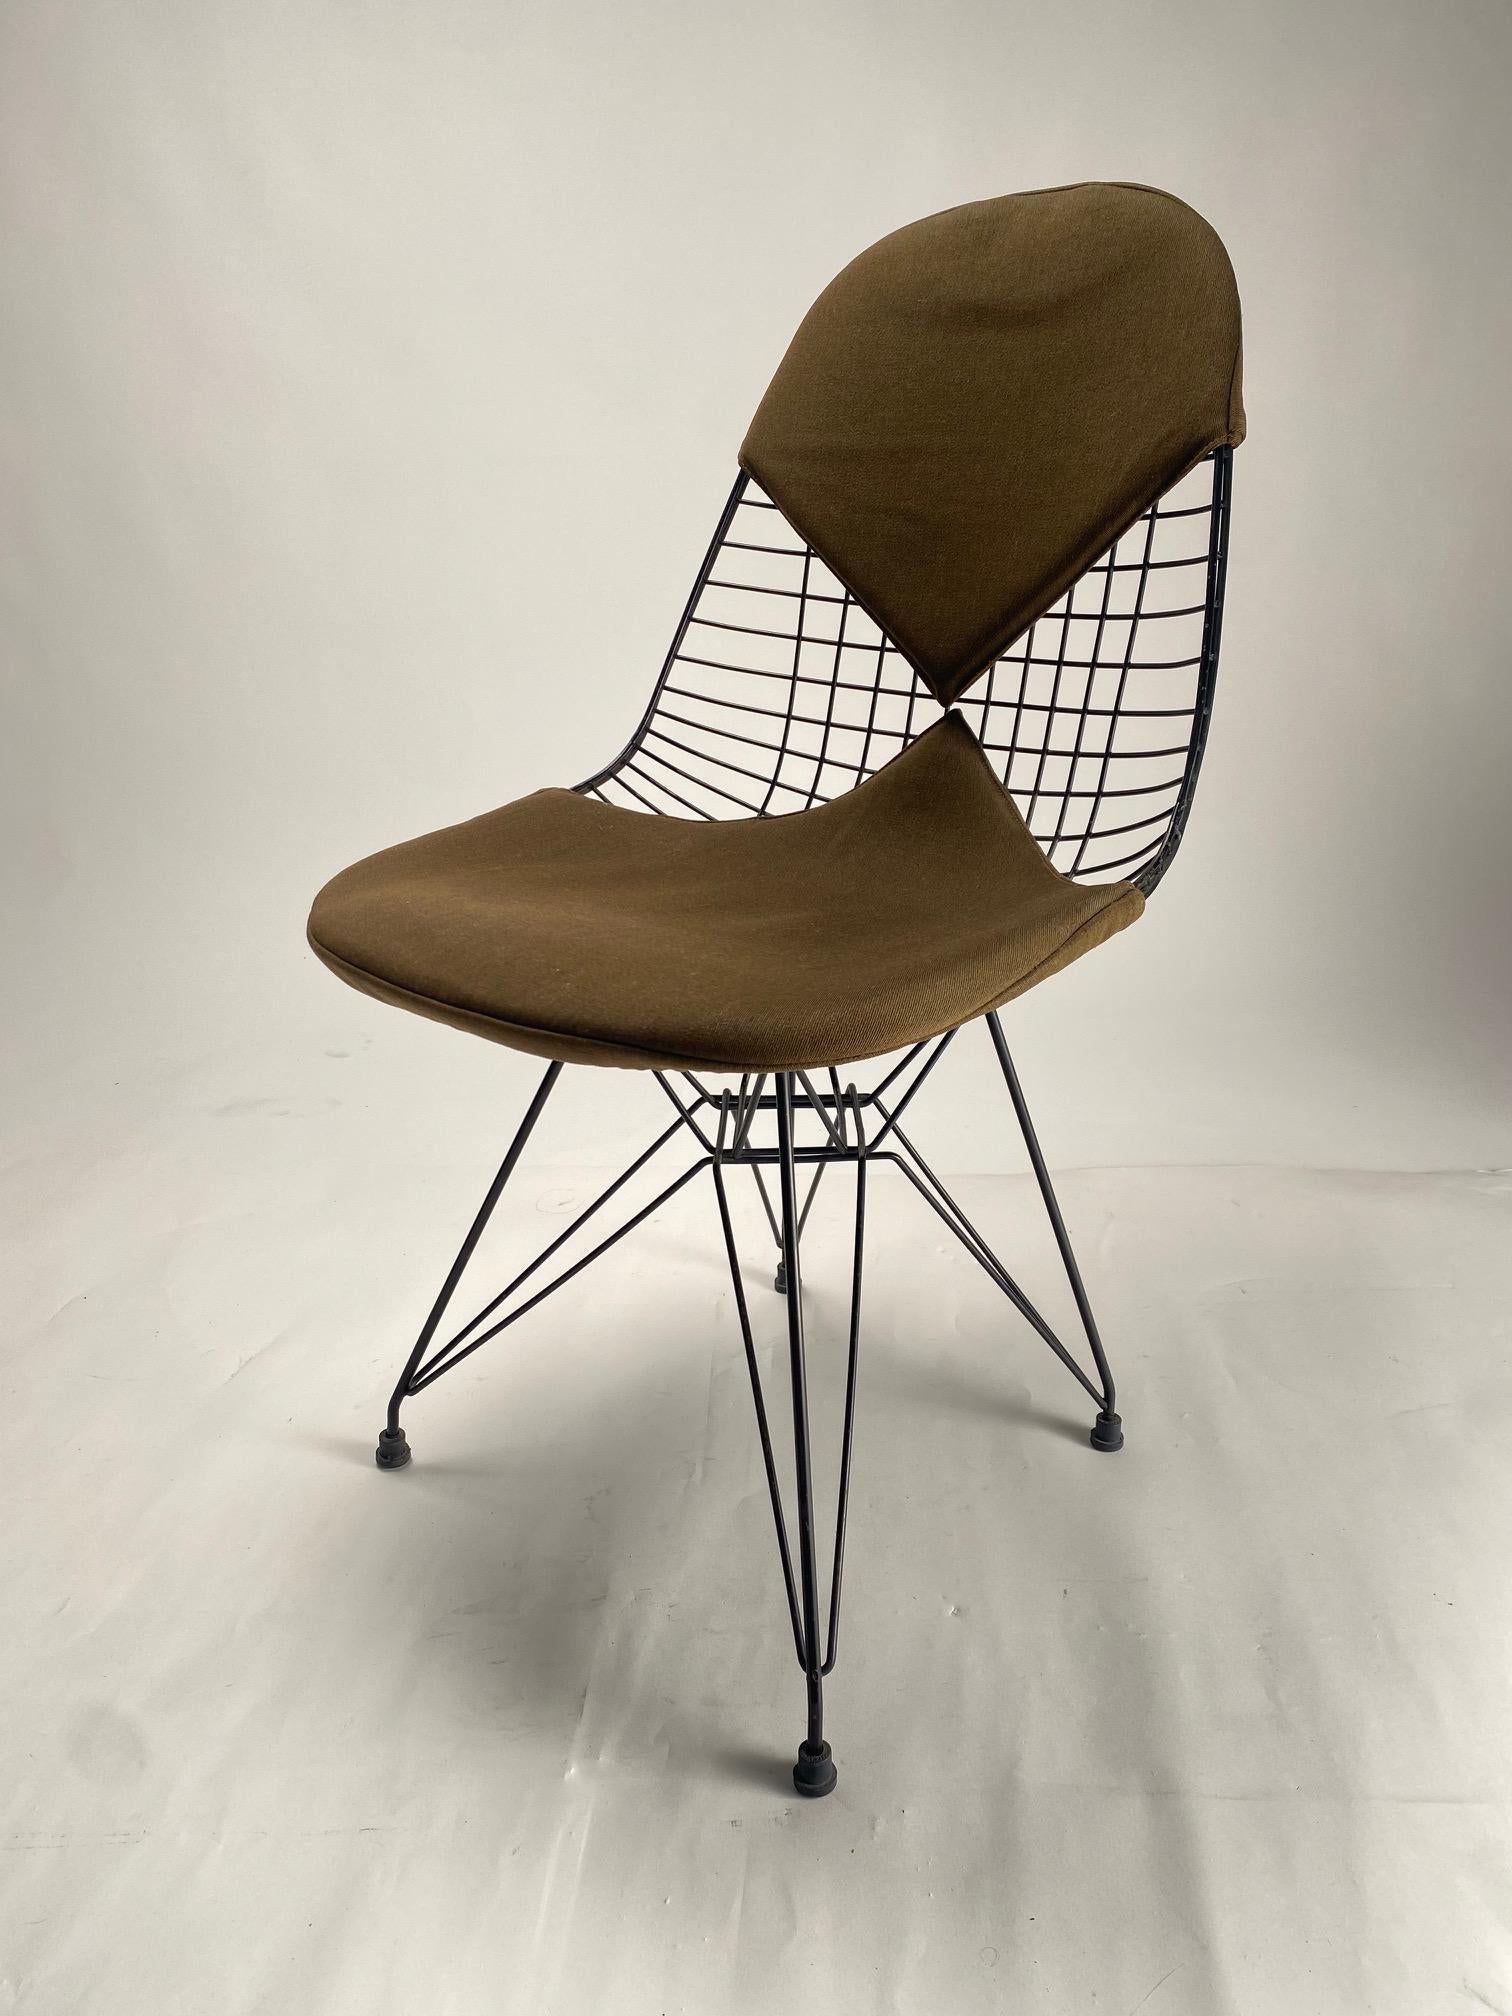 Mid-20th Century Charles Eames Wire Chairs with Bikini Cover on Eiffel Base's (Old Edition) For Sale